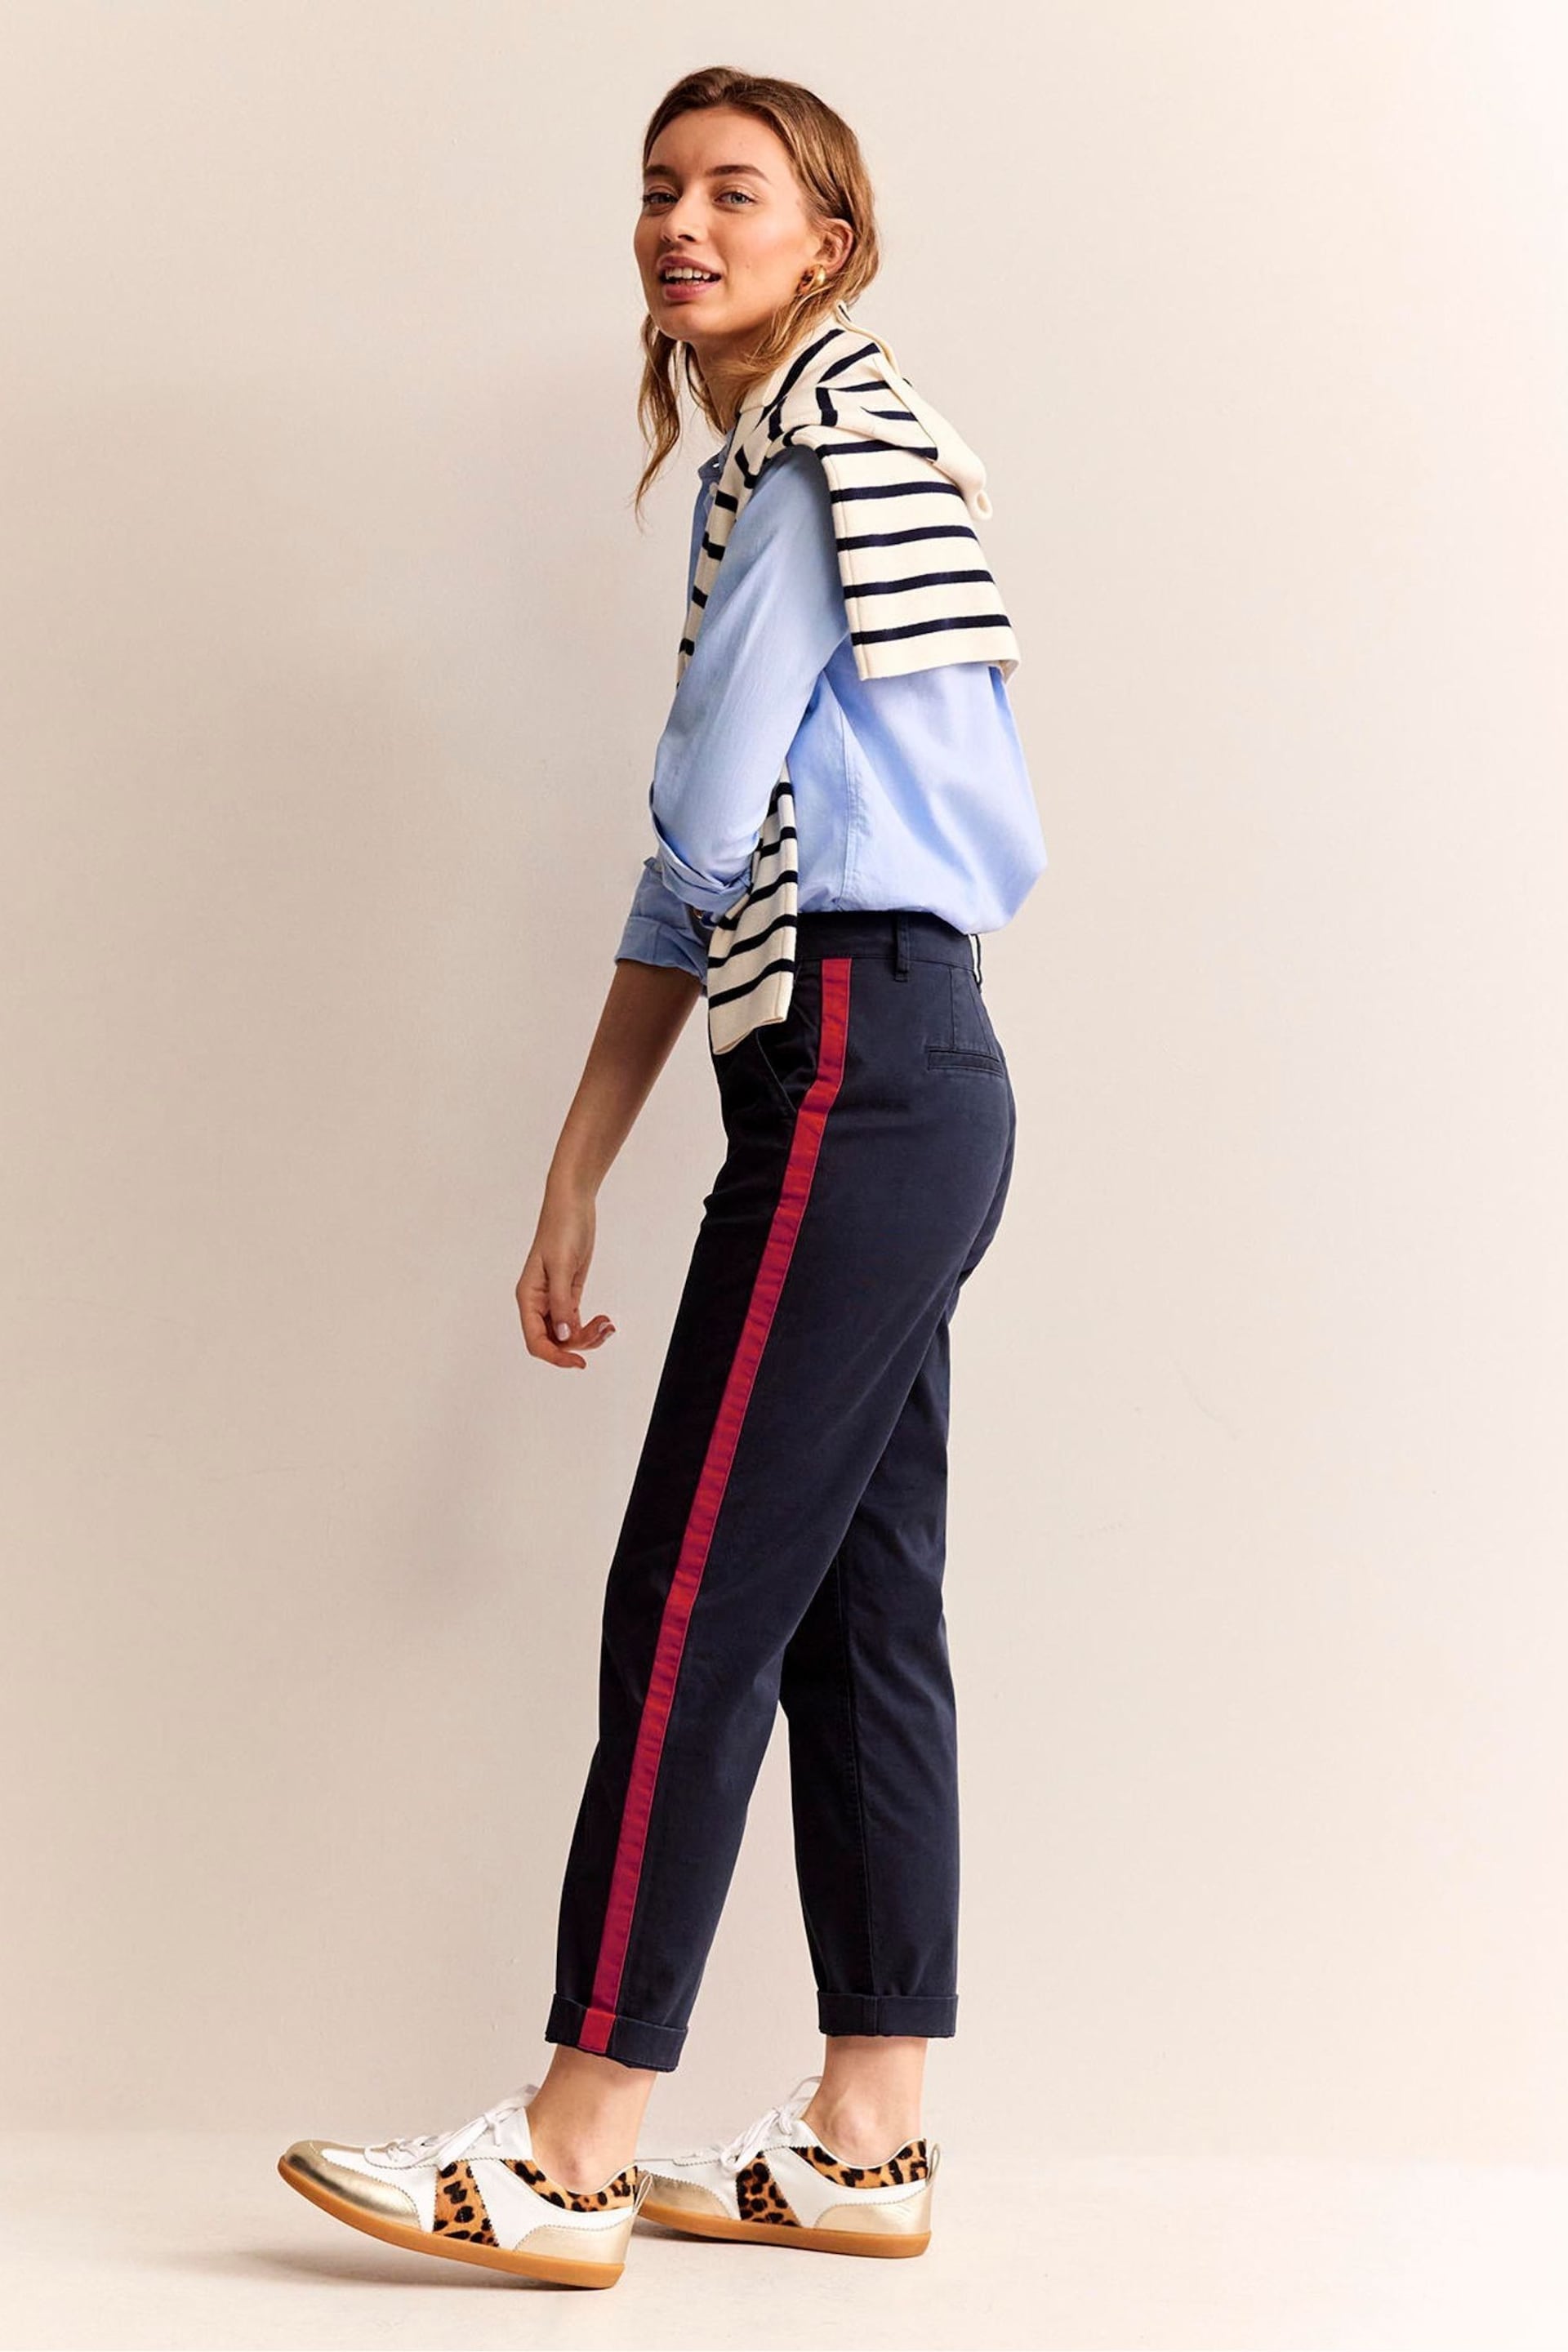 Boden Blue Petite Barnsbury Chinos Trousers - Image 1 of 5